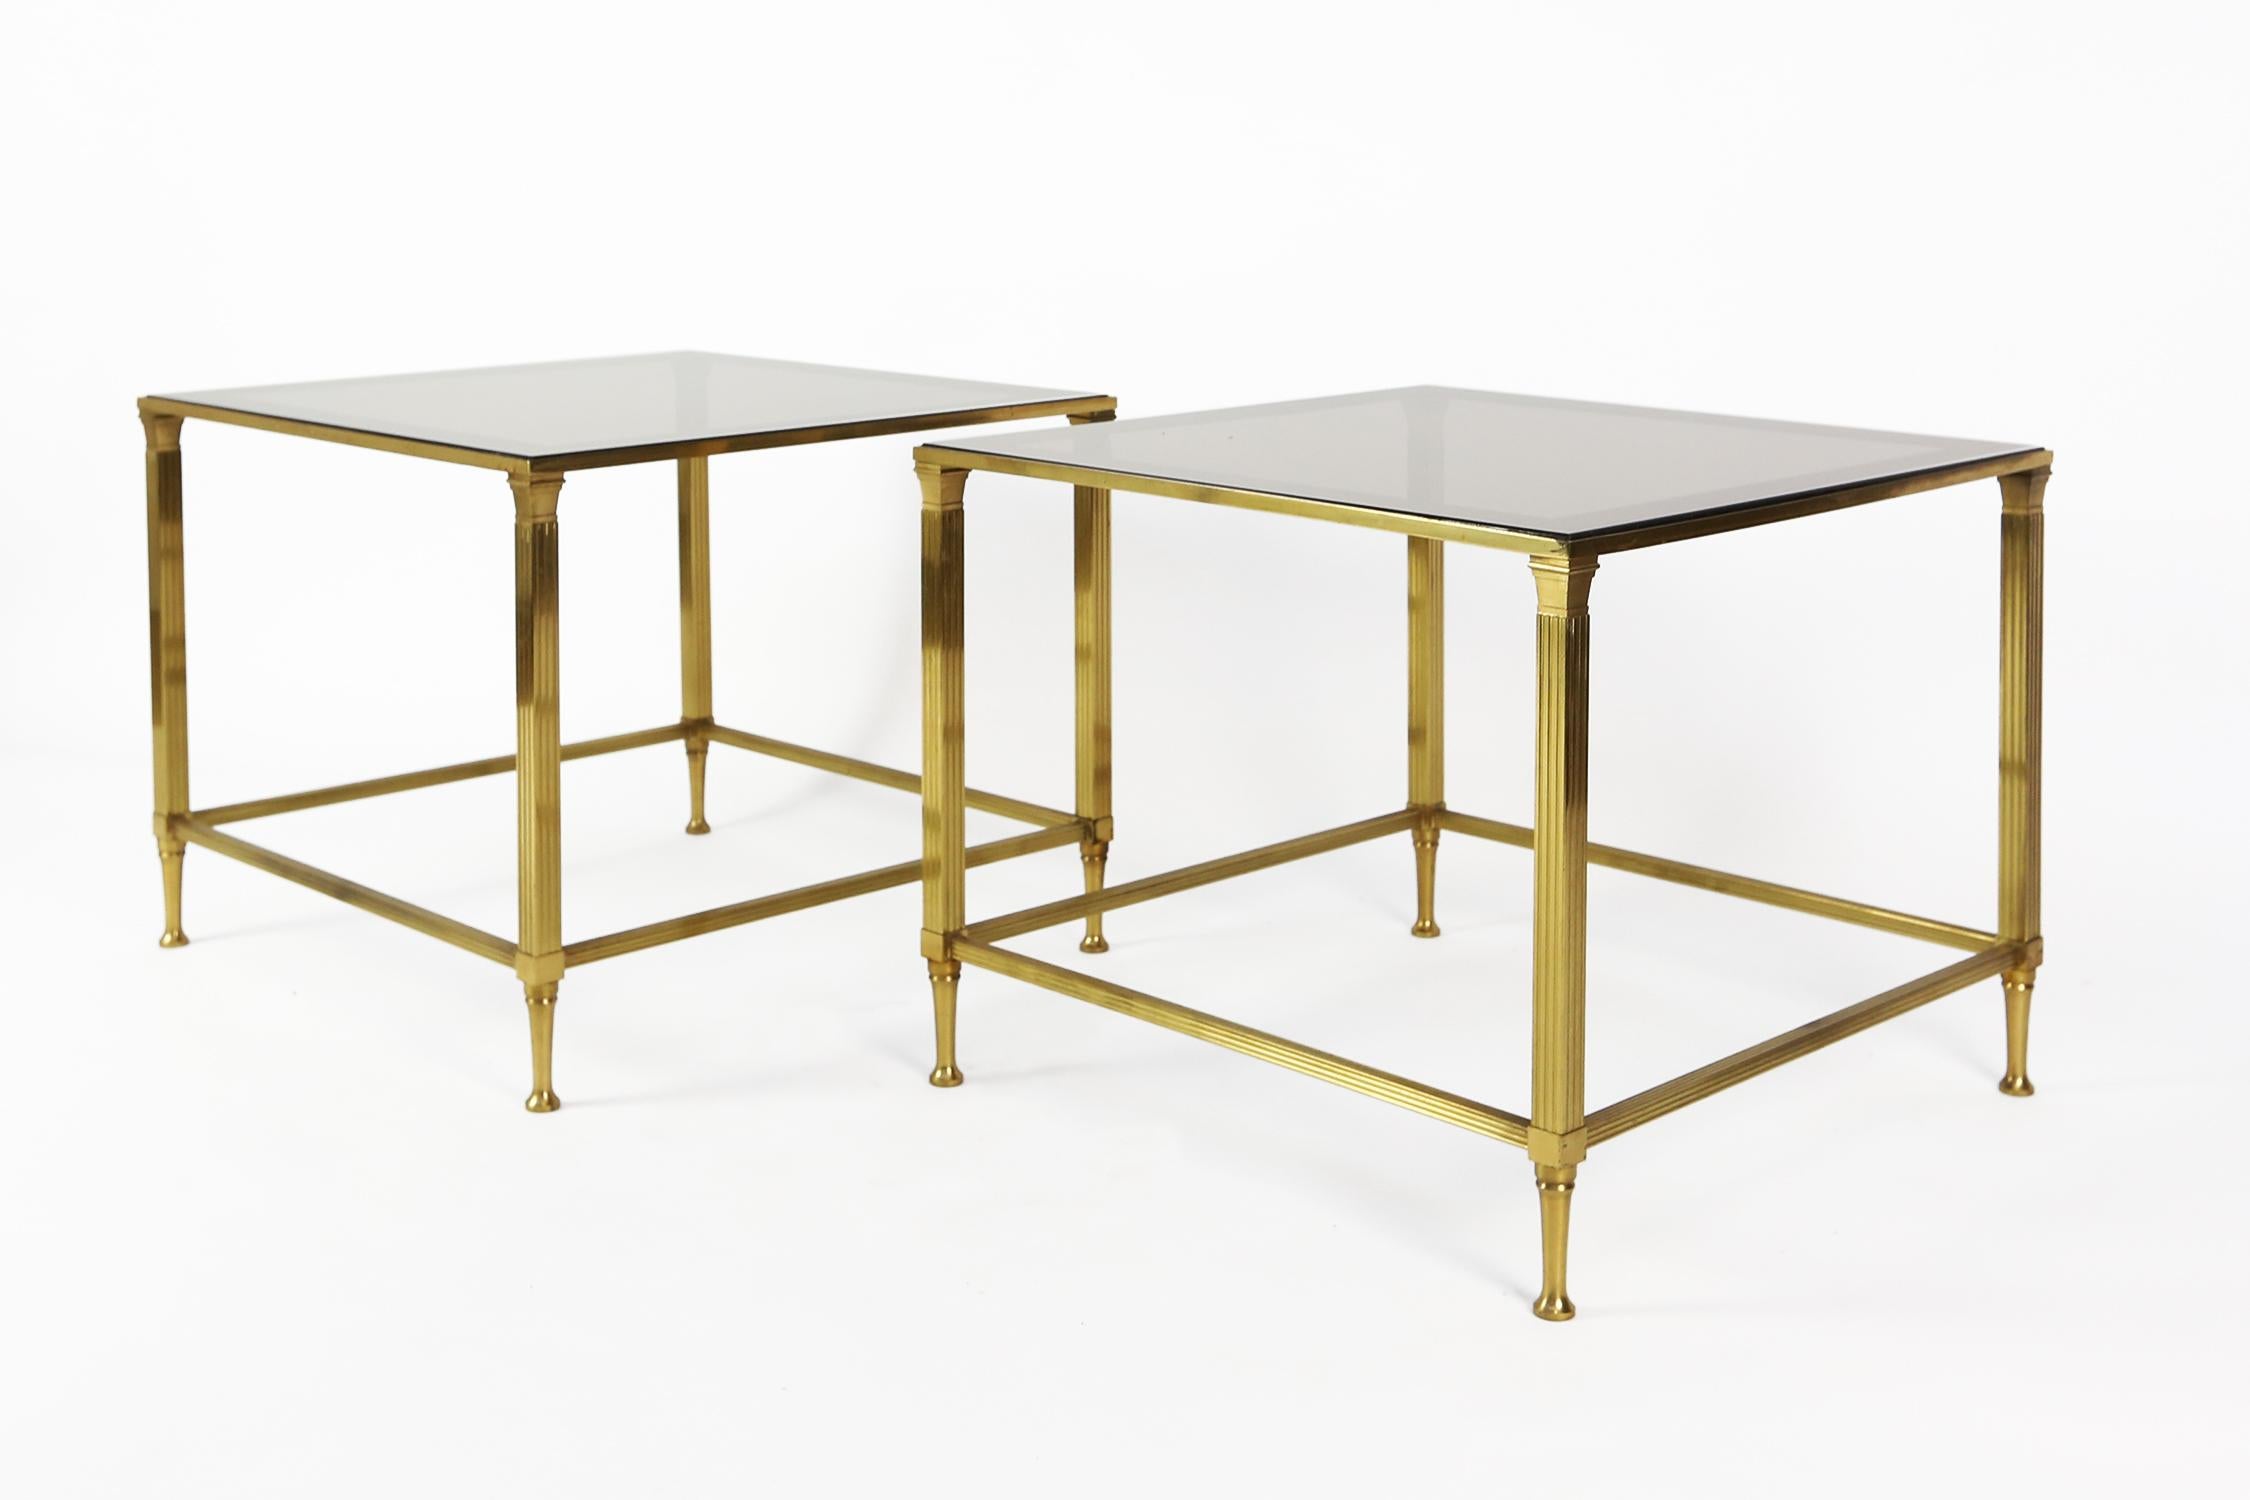 A fine pair of gilt bronze and aged mirrored glass side tables by Maison Jansen,
Paris
French, circa 1950.